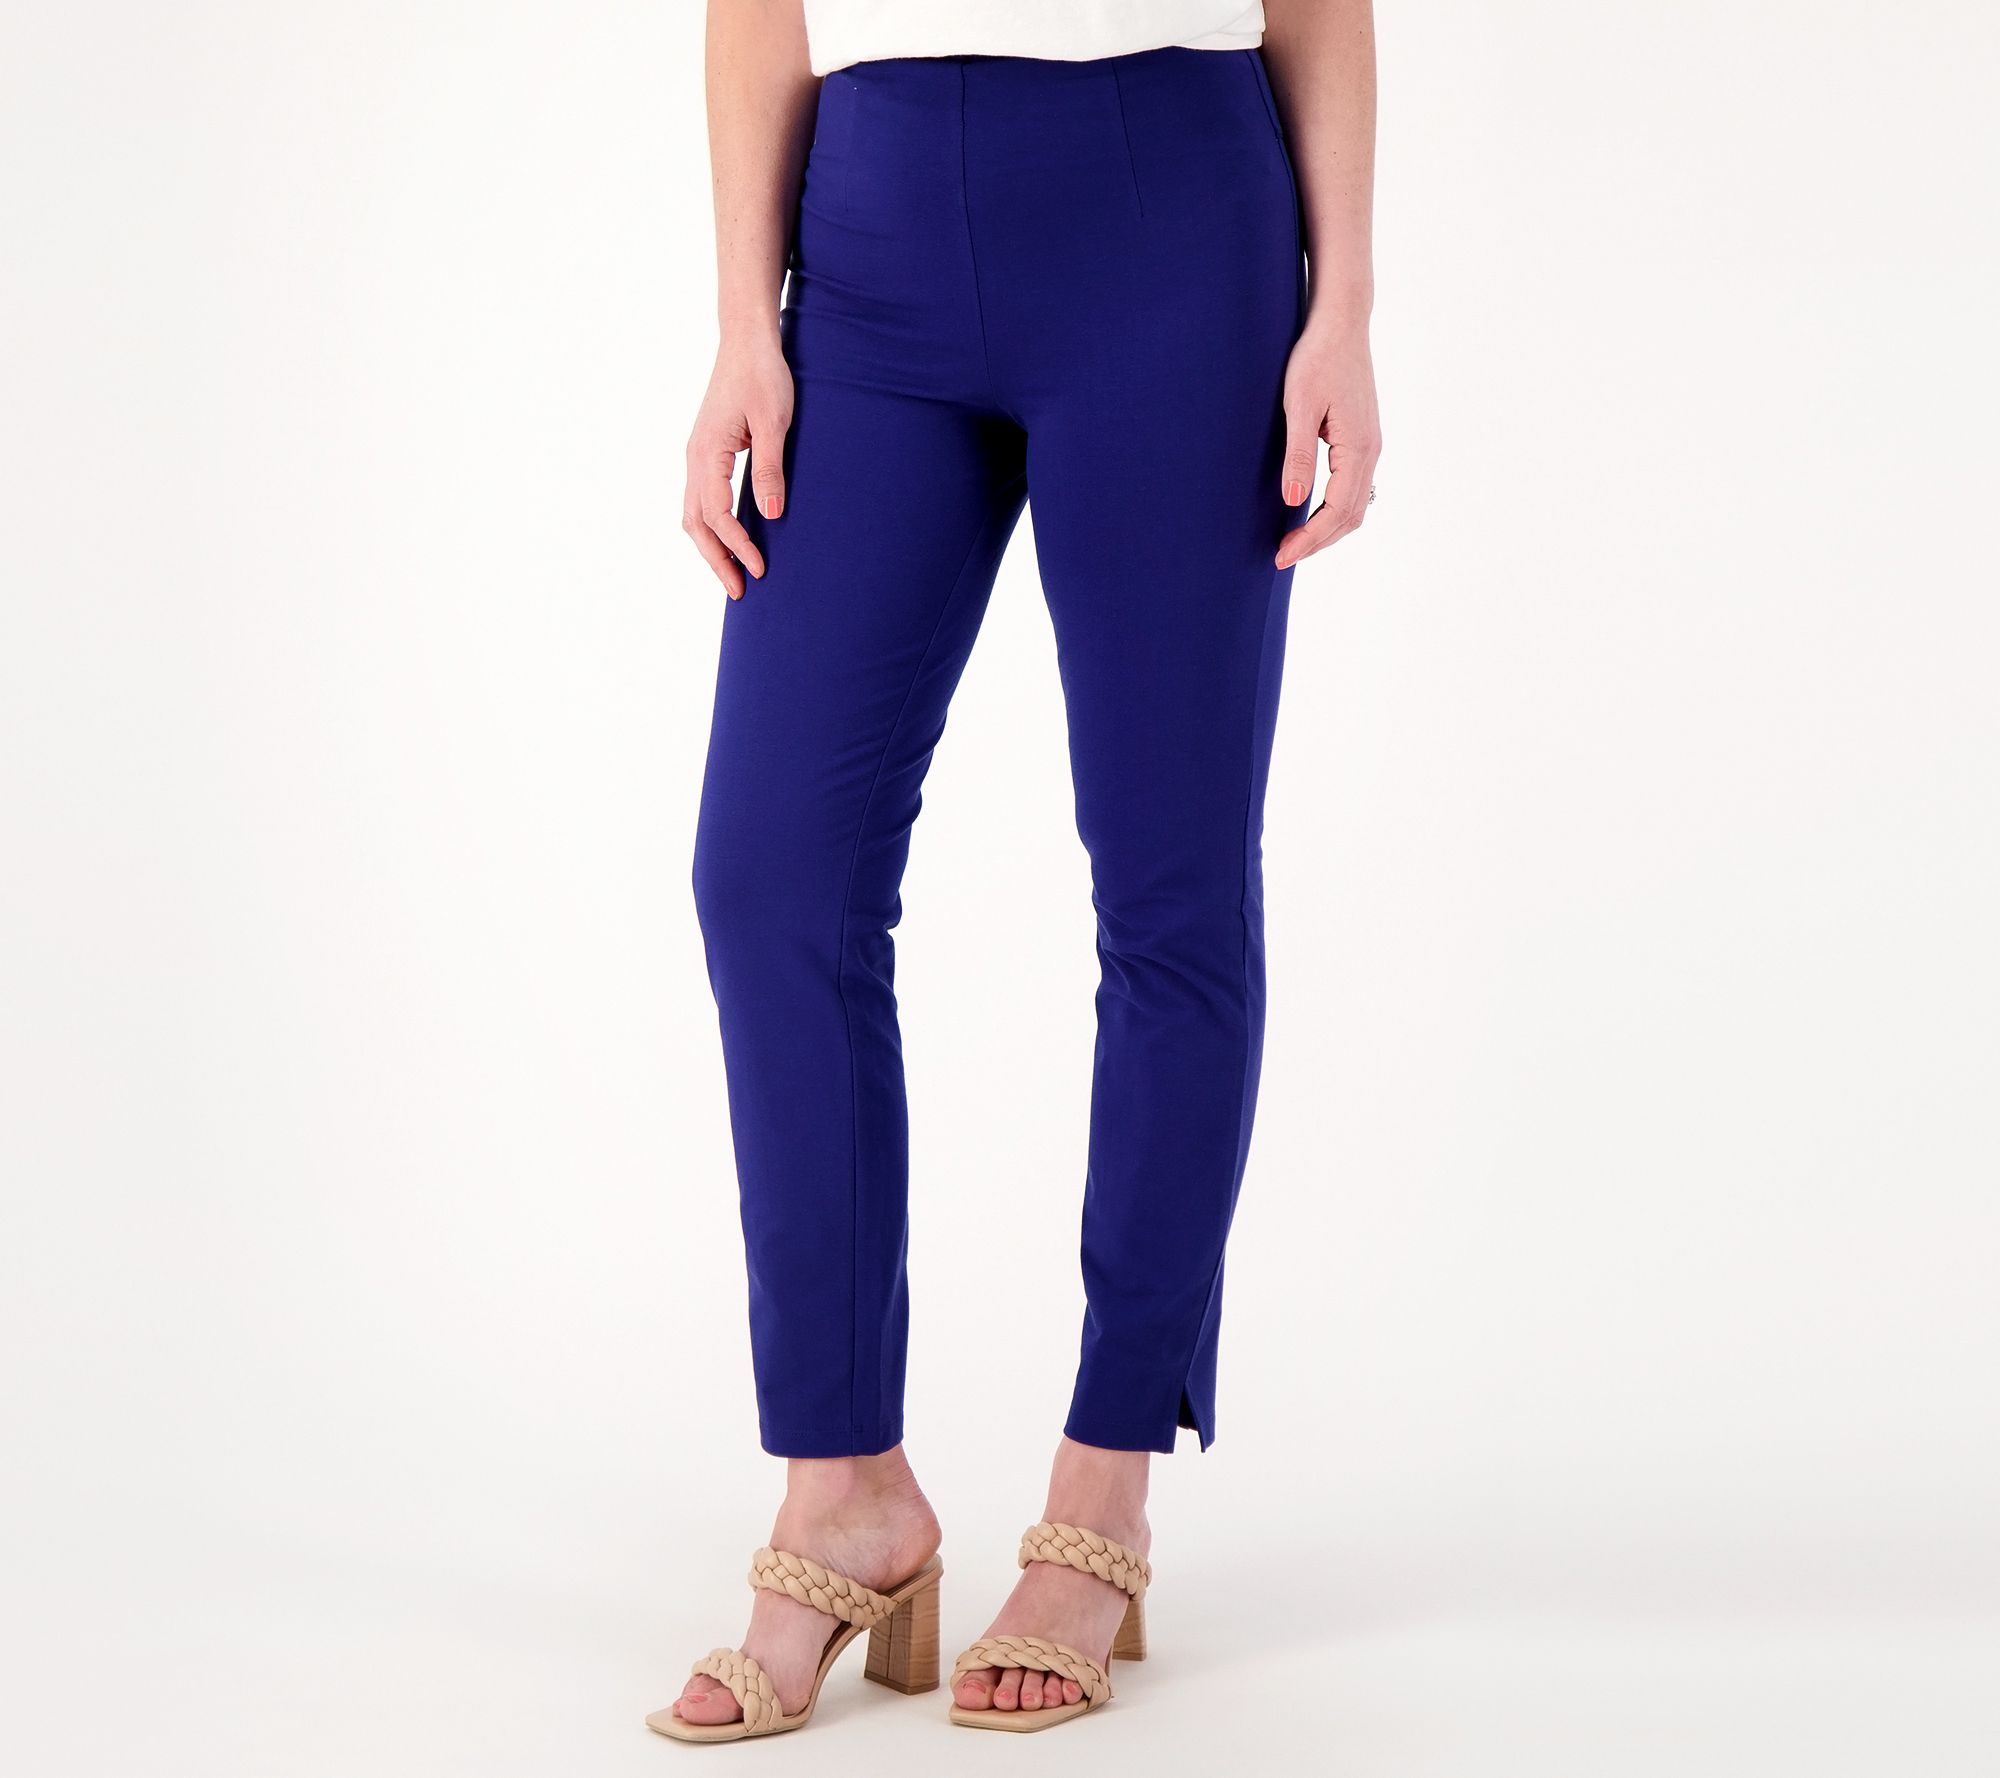 Women with Control - Blue - Full-Length Pants 